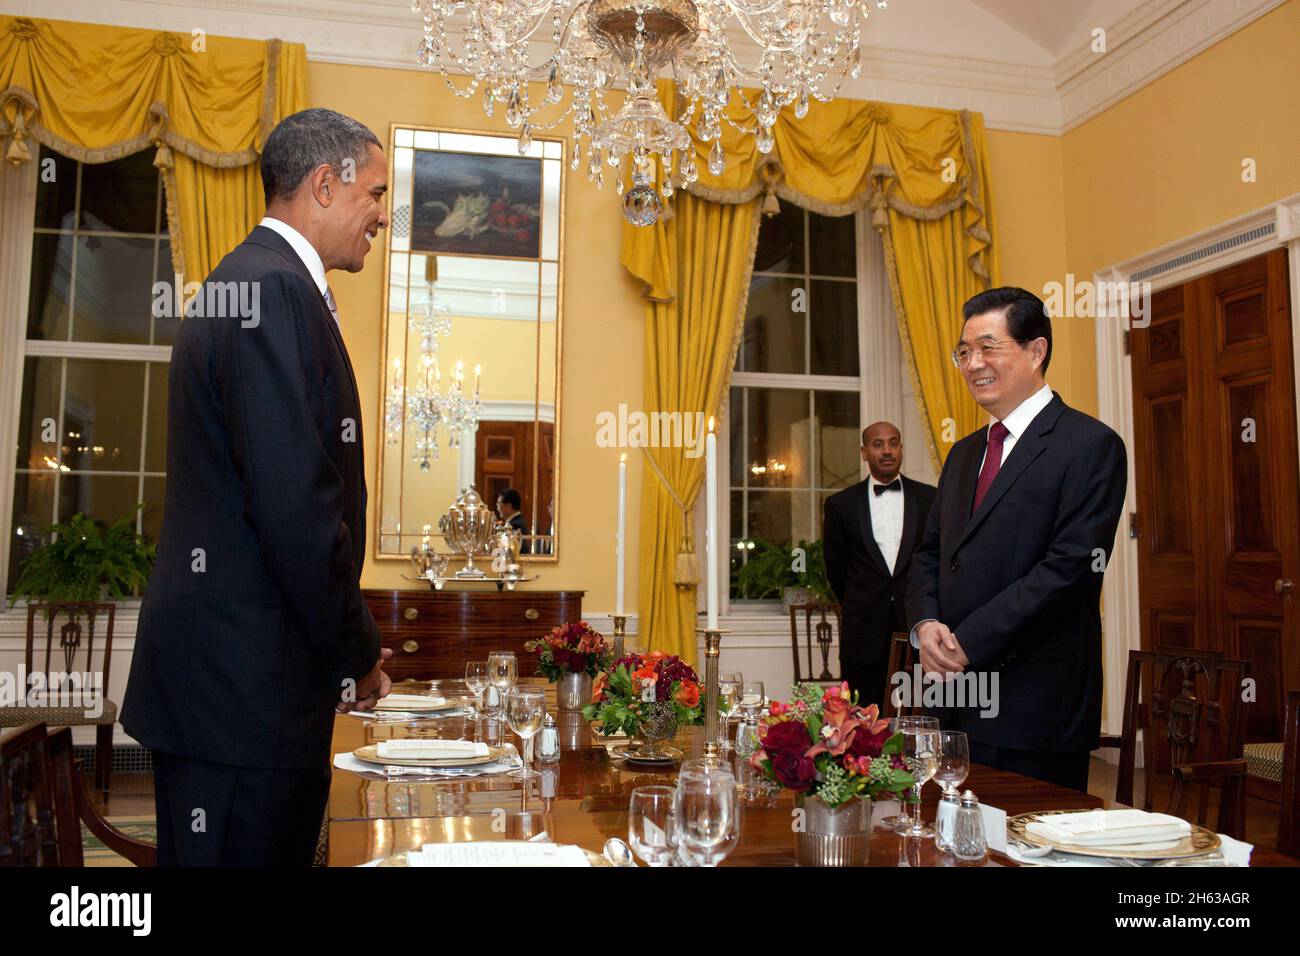 President Barack Obama and President Hu Jintao of China begin their working dinner in the Old Family Dining Room of the White House, Jan. 18, 2011. Stock Photo